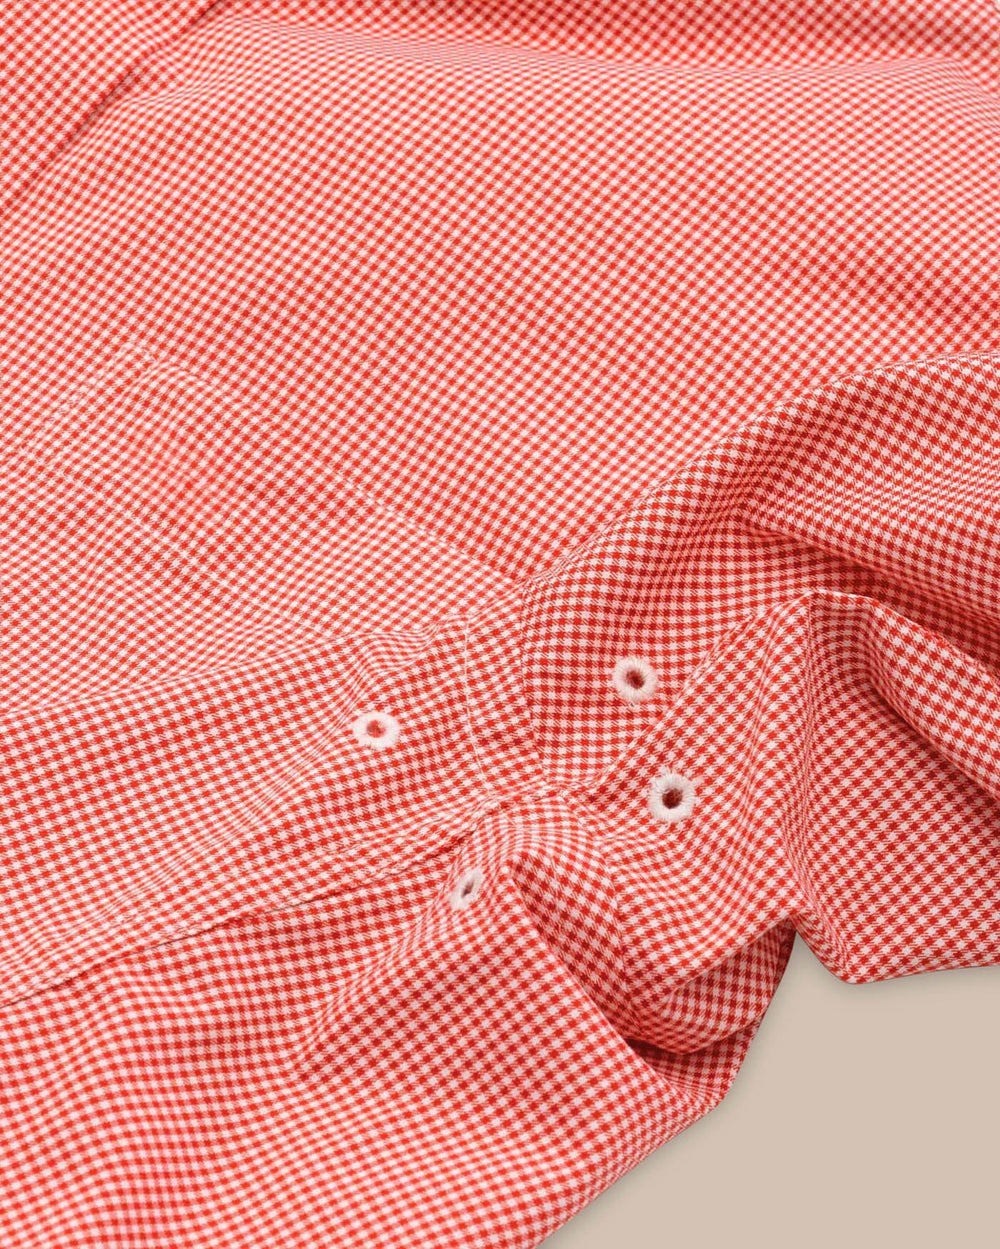 The detail view of the Southern Tide Team Colors Gingham Intercoastal Sport Shirt by Southern Tide - Endzone Orange